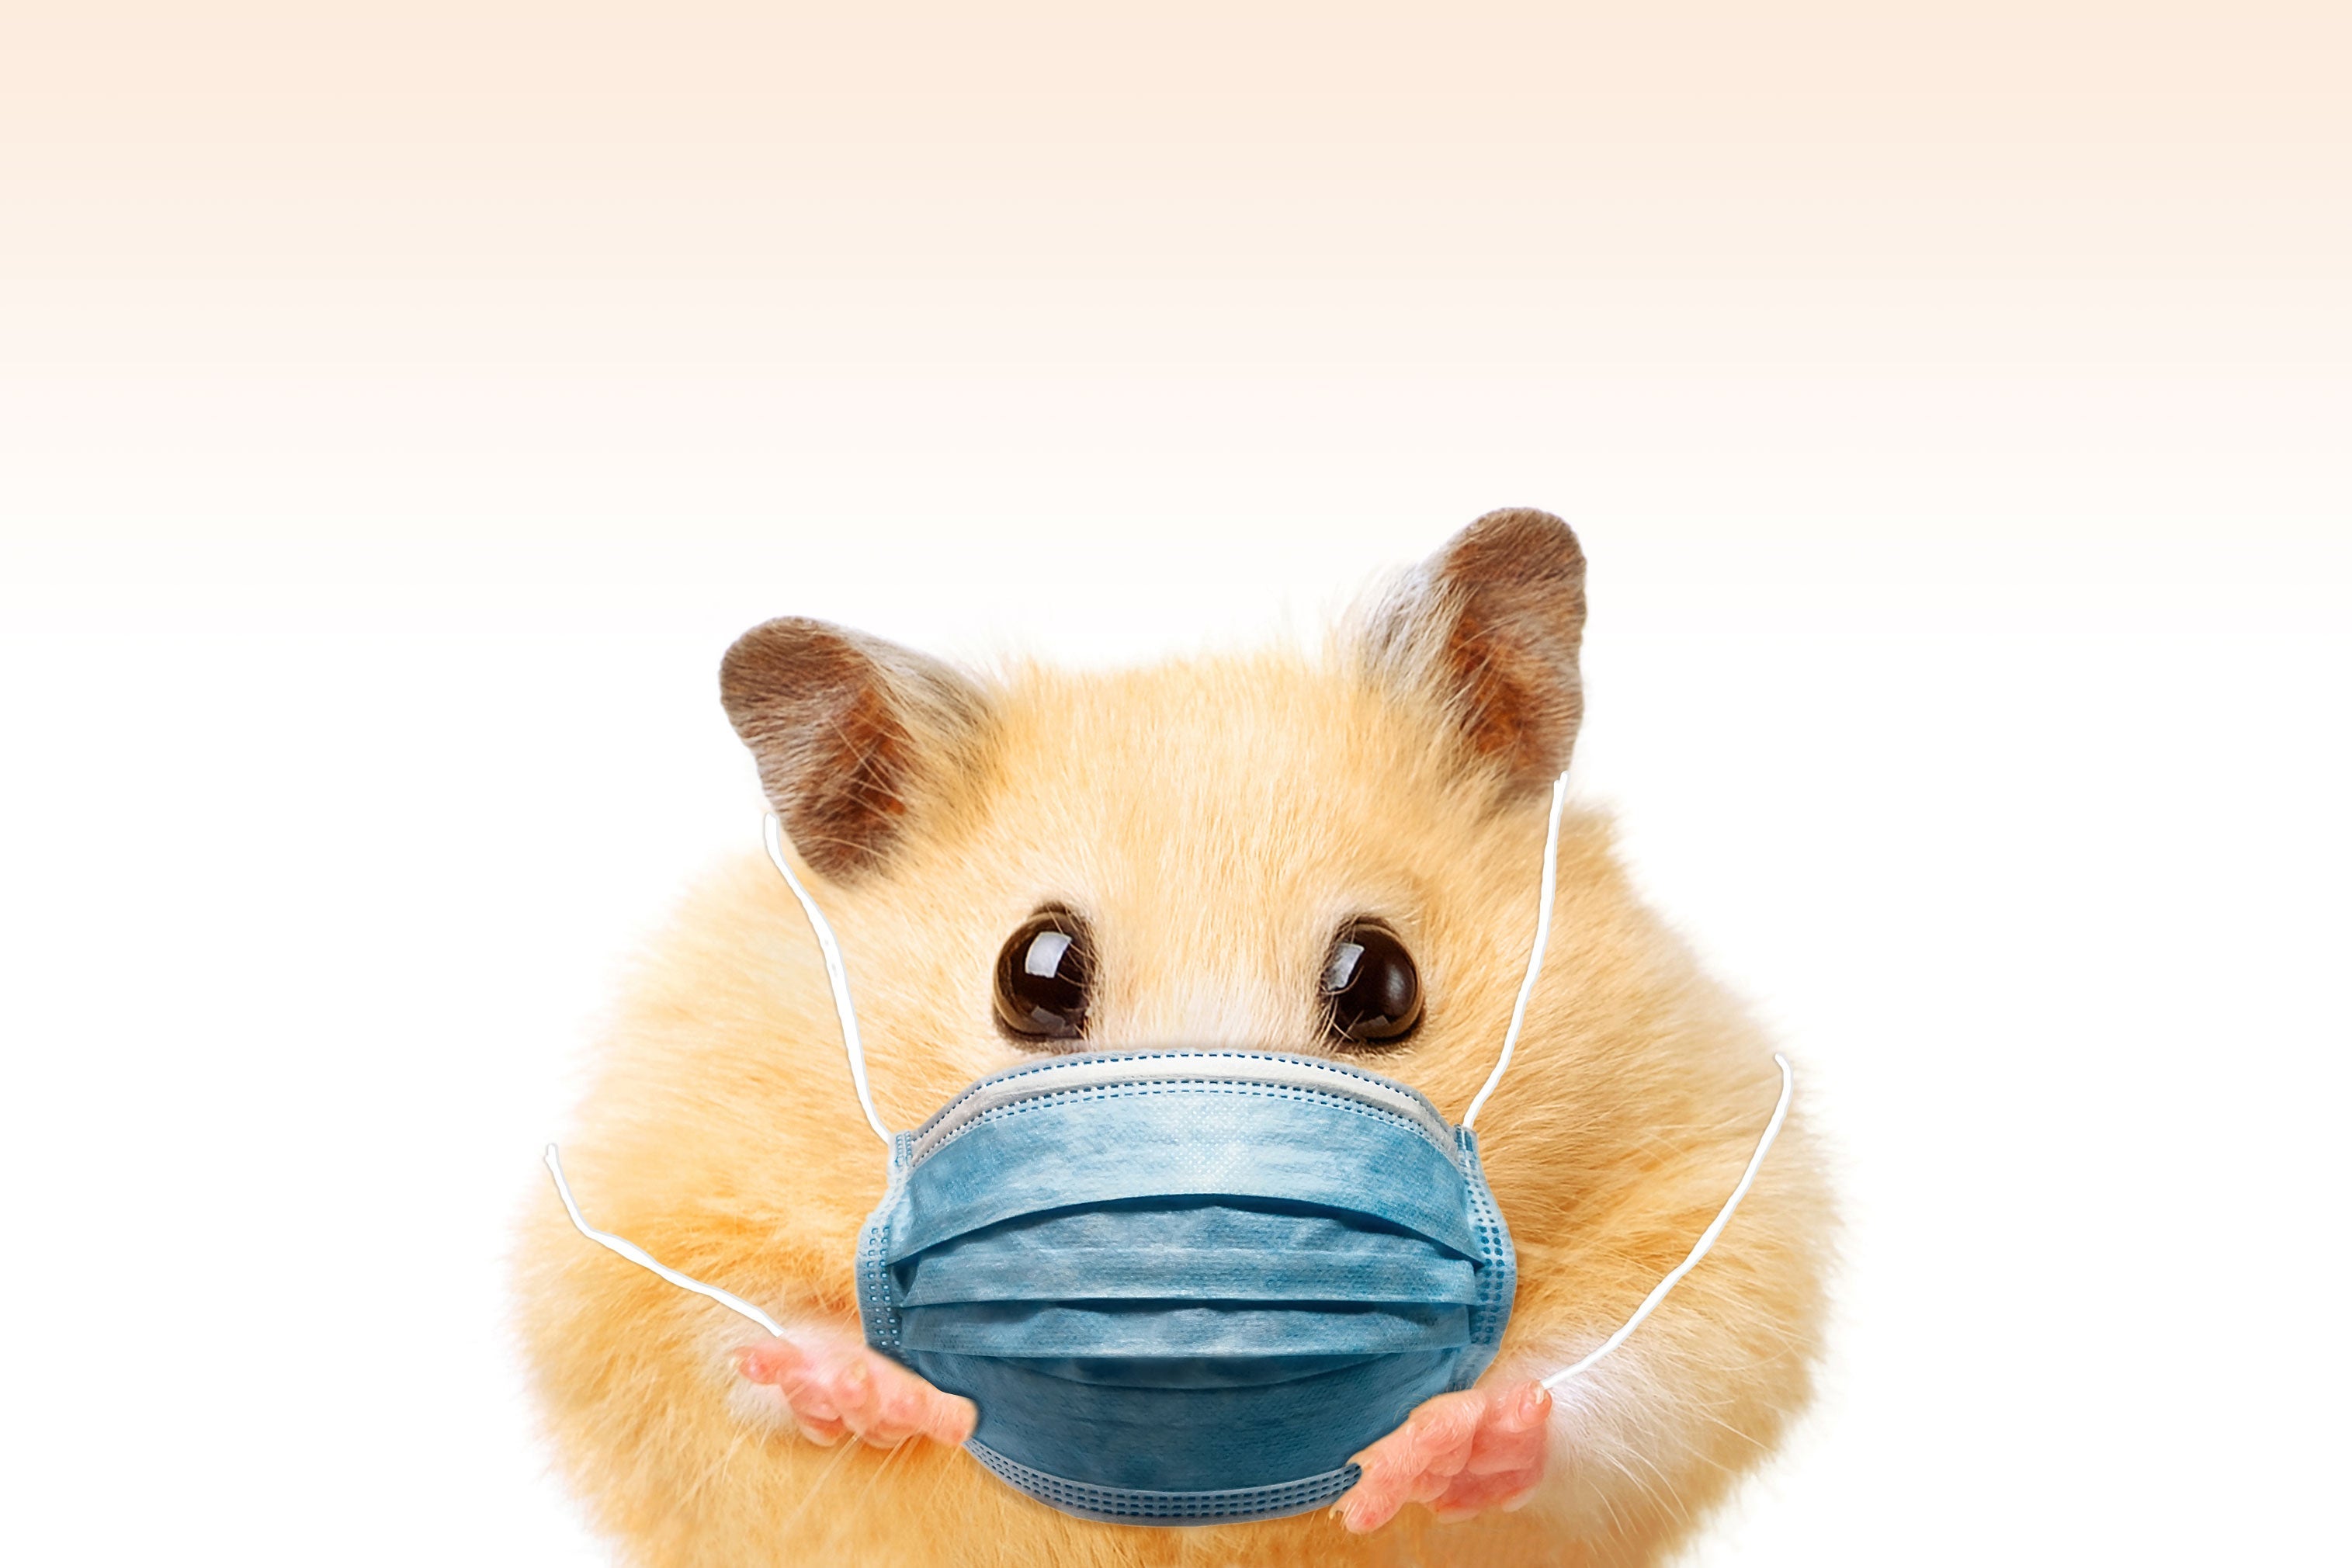 A hamster wearing a surgical mask.